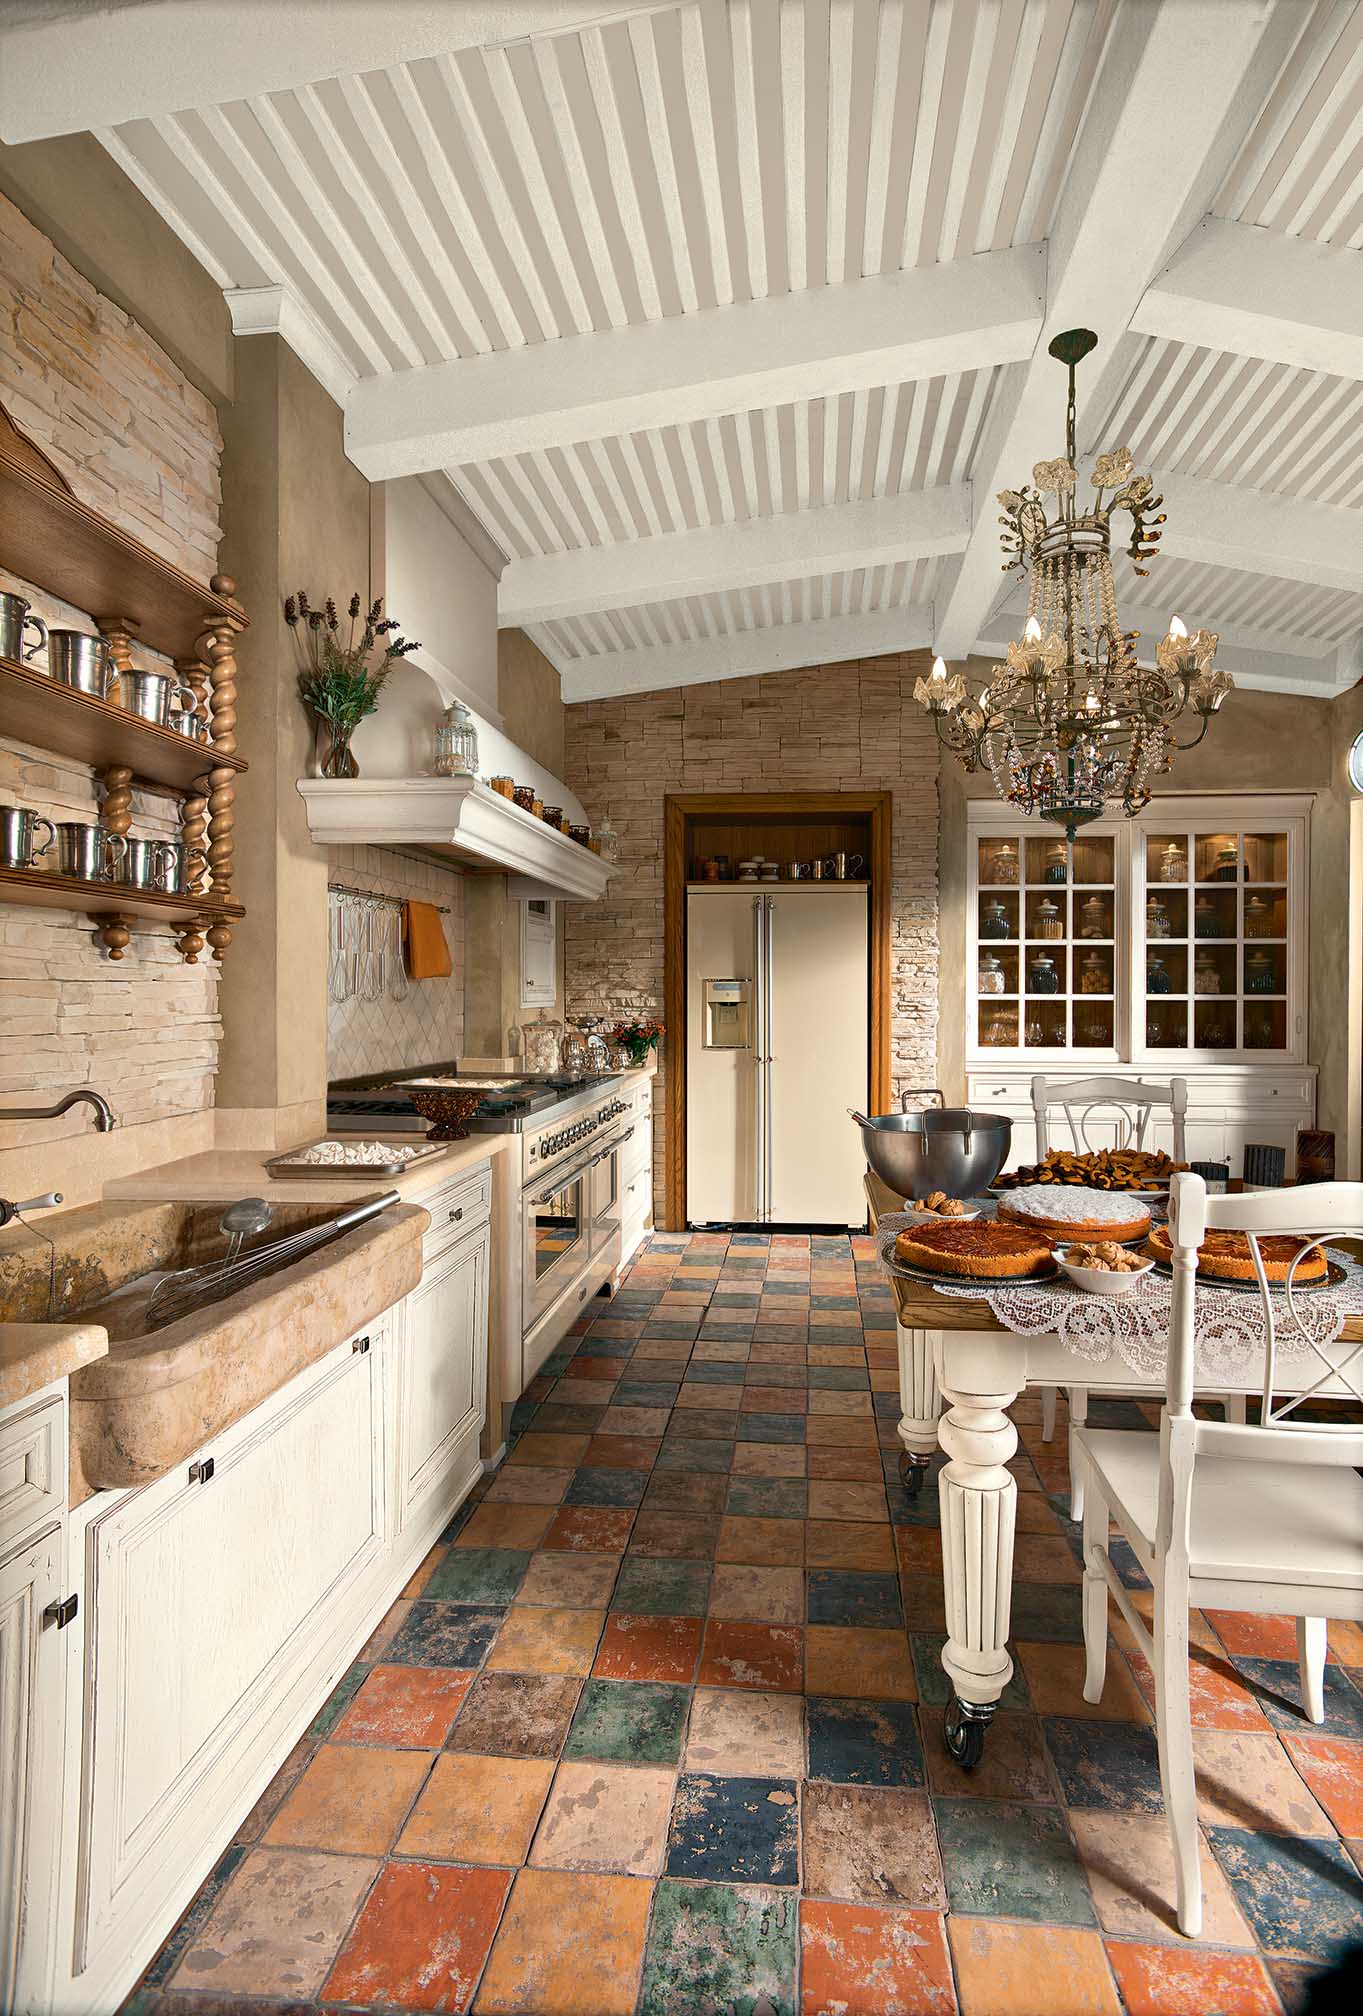 Cucina-country-bianca-Cucina-Old-Style-LOttocento